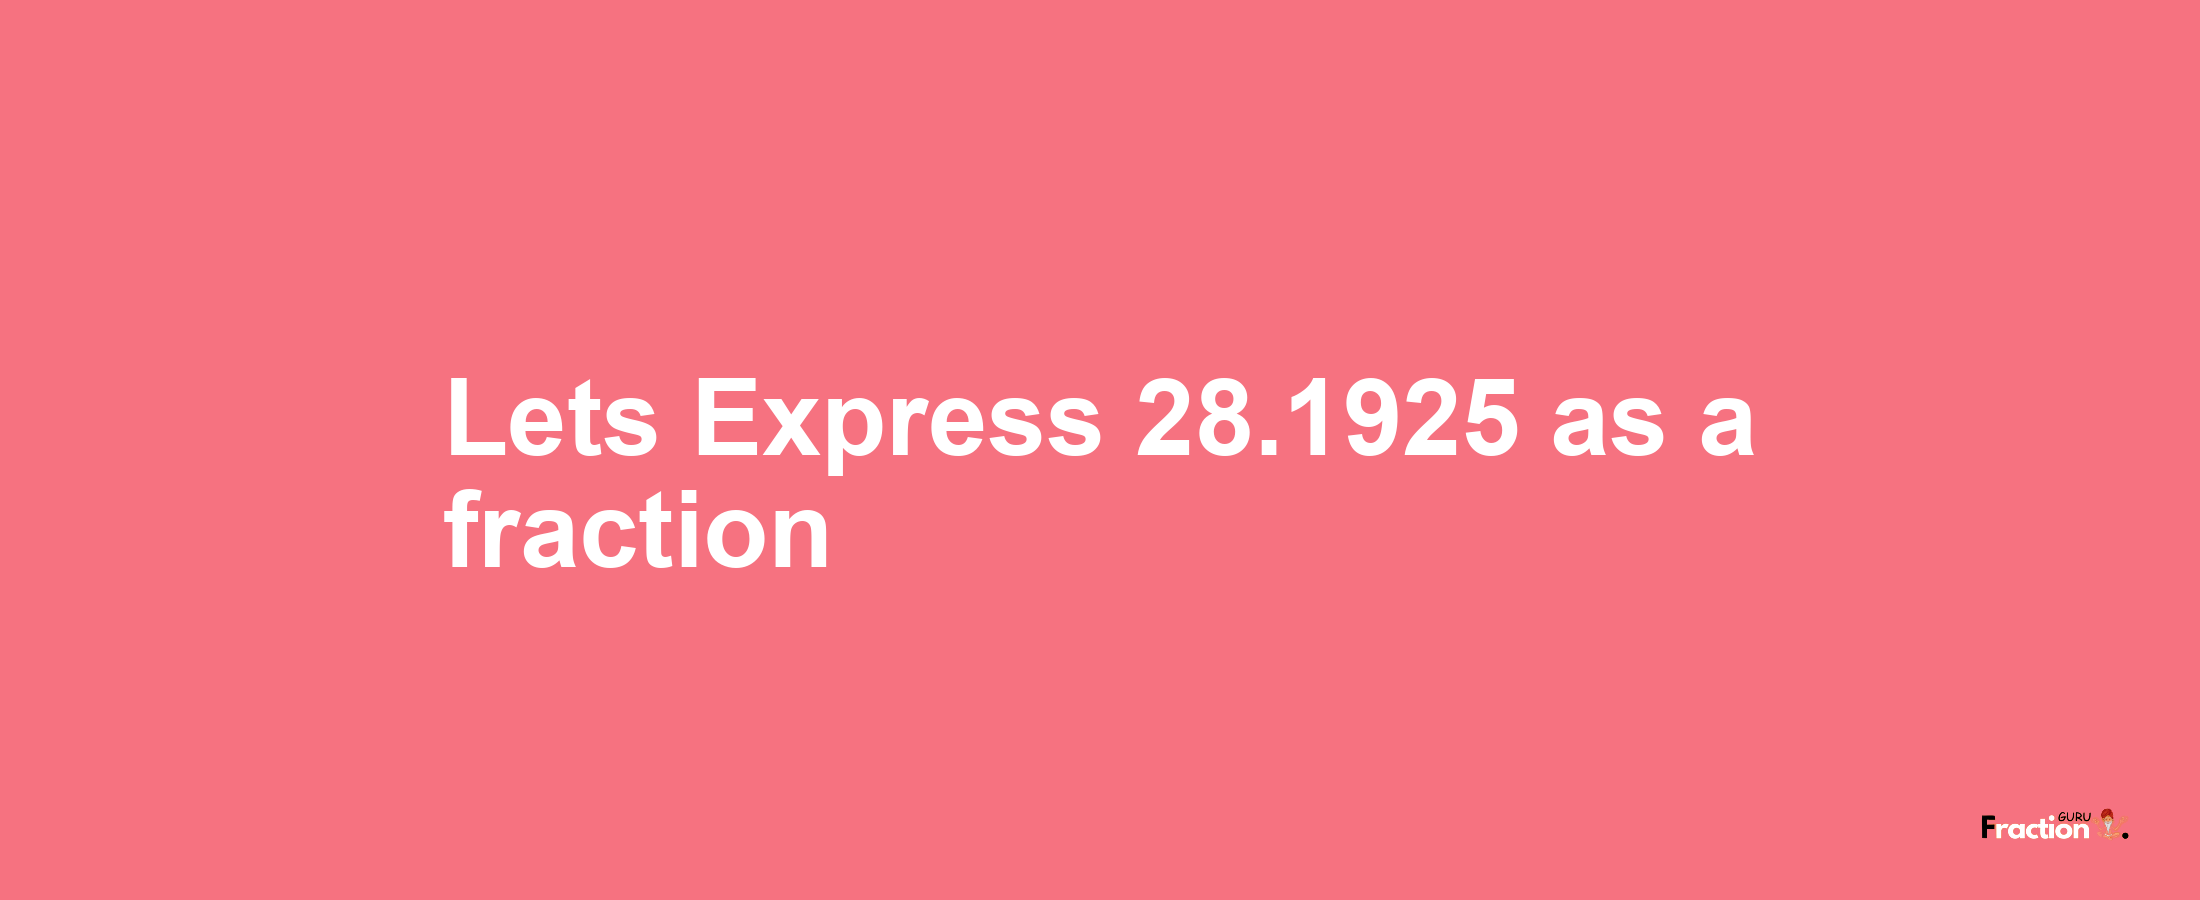 Lets Express 28.1925 as afraction